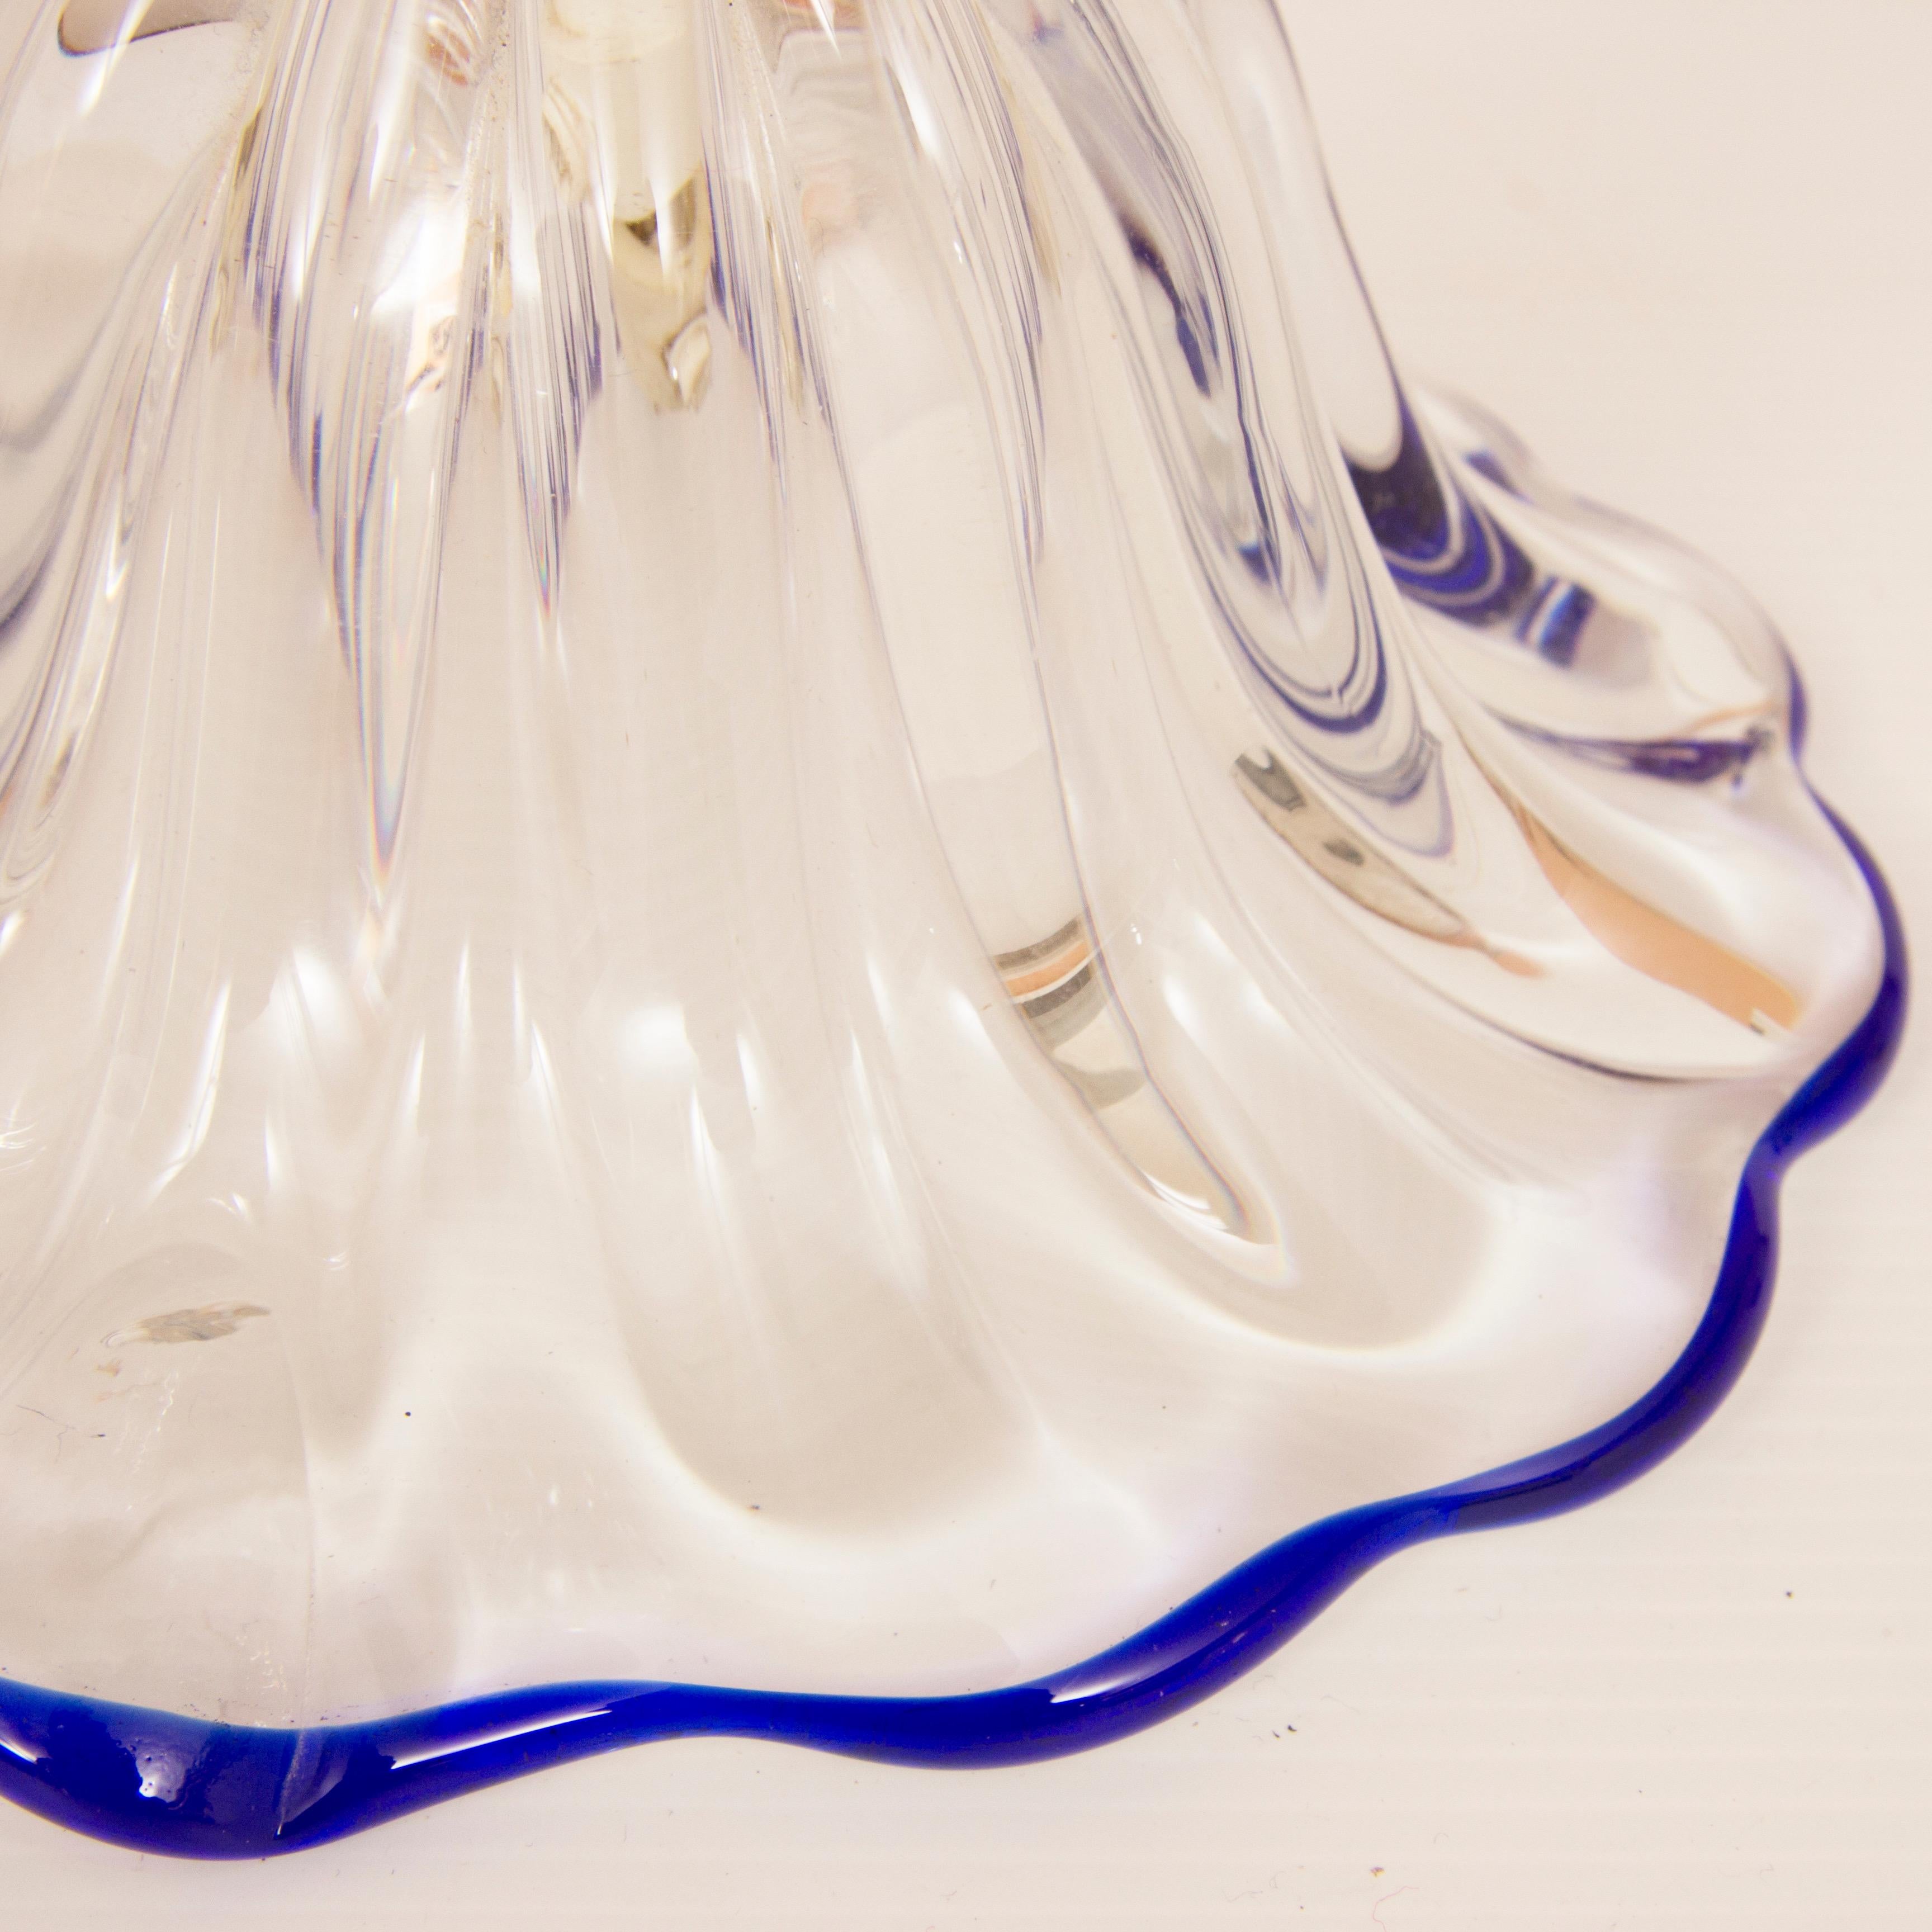 A pair of midcentury blown glass table lamps by Archimede Seguso.
Beautiful clear glass table lamps with royal blue ribbon to the top and base, the glass is a fluted tulip form with central bauble.
H: 25cm W: 17cm D: 17cm
Italy c 1960